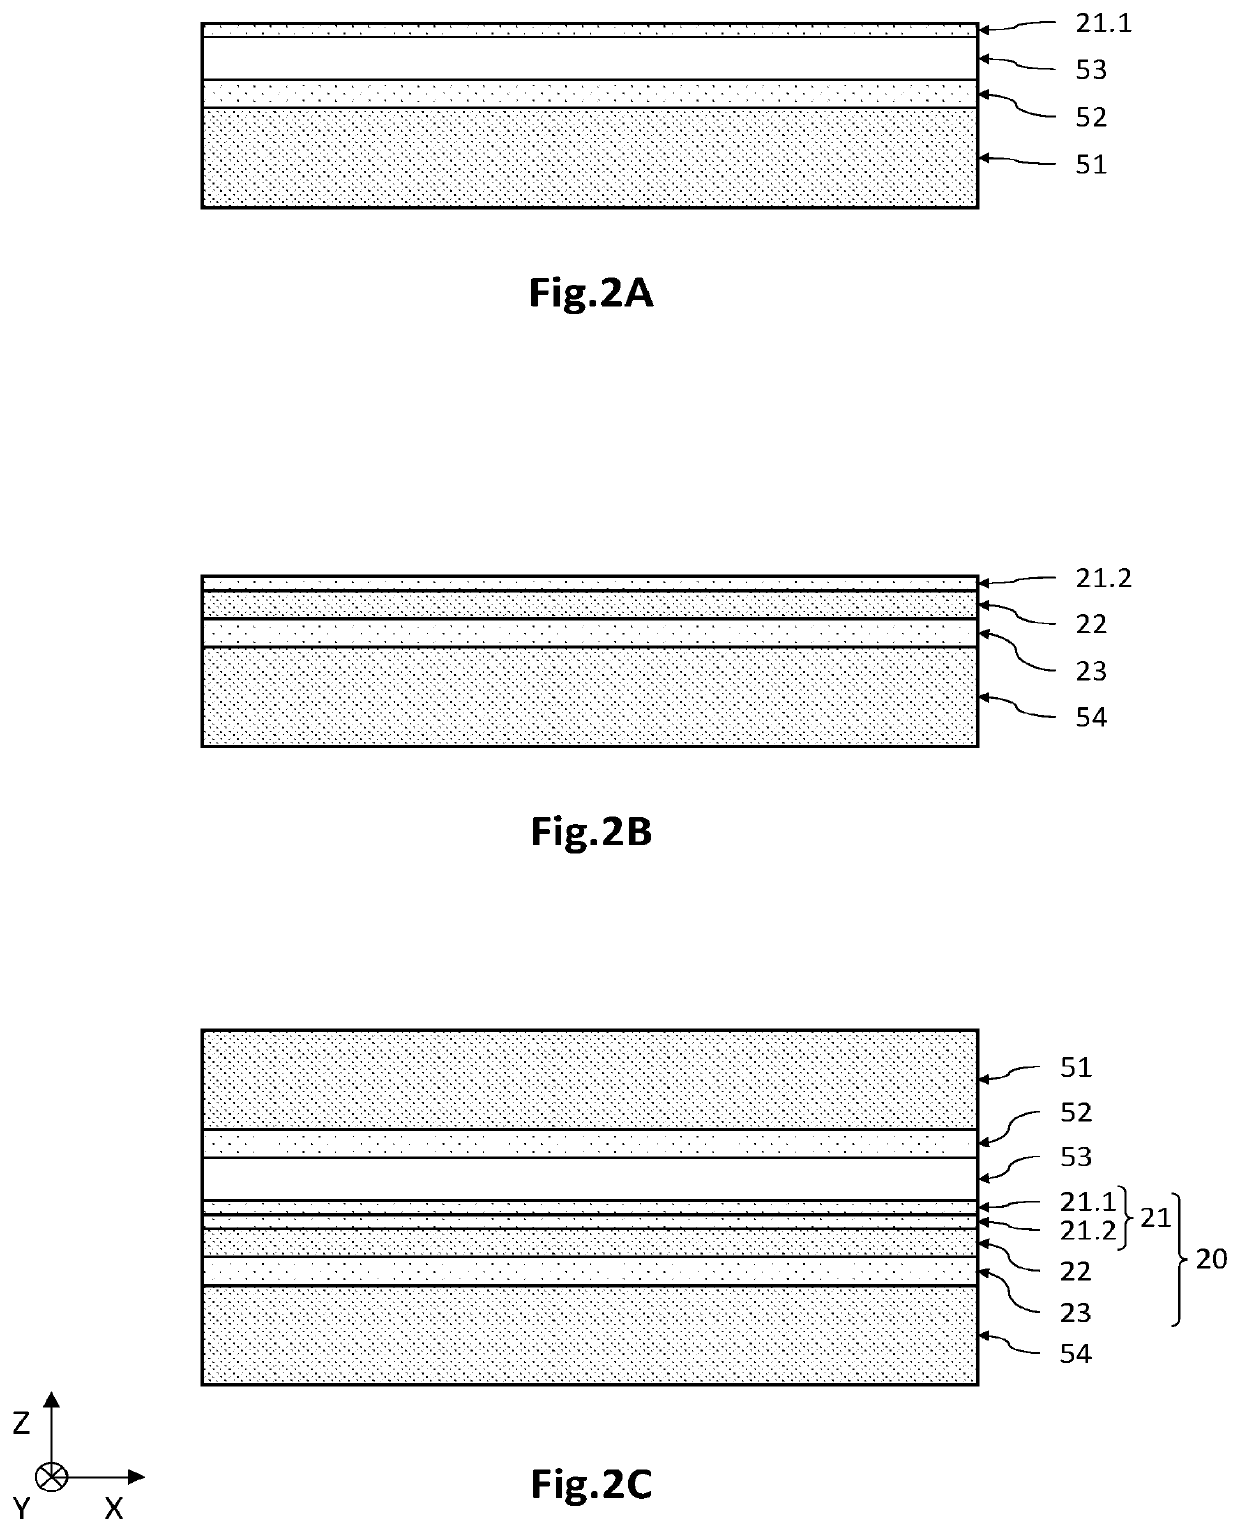 Process for fabricating at least one tensilely strained planar photodiode